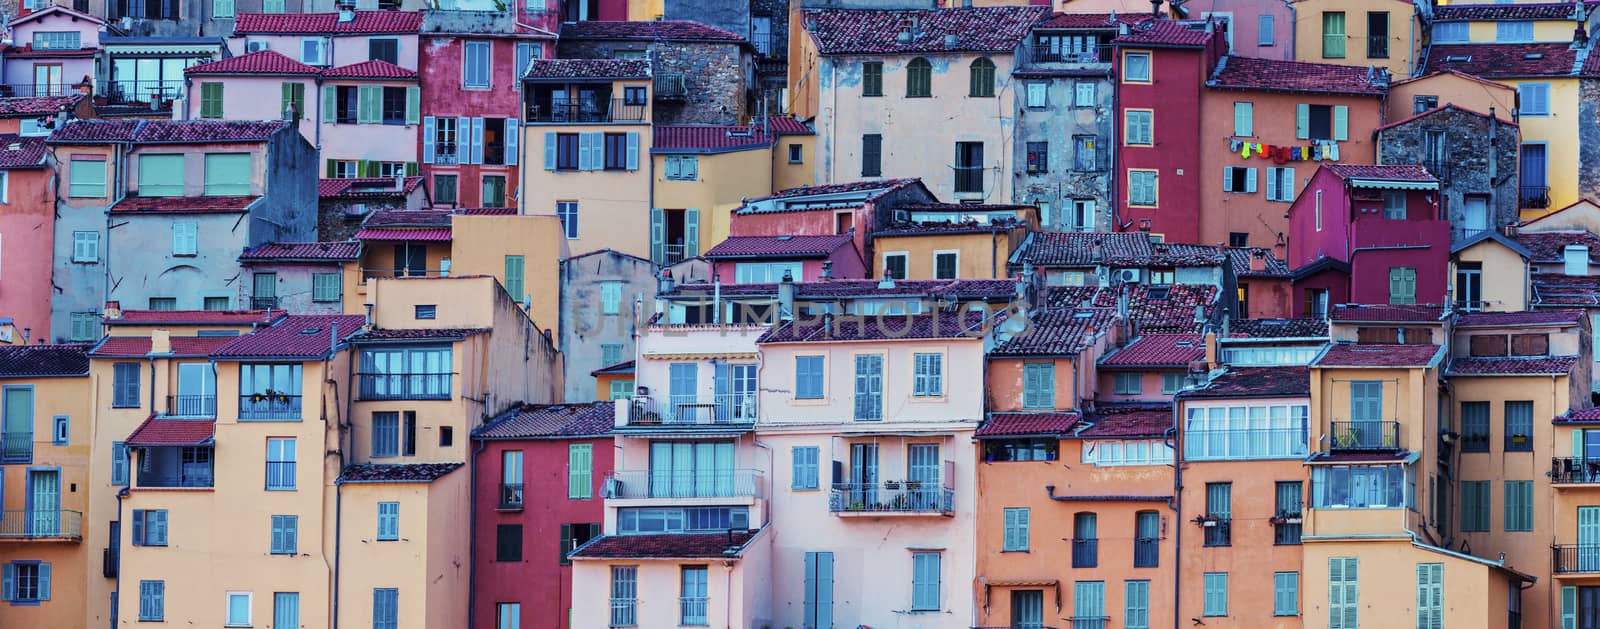 Architecture of Menton by benkrut